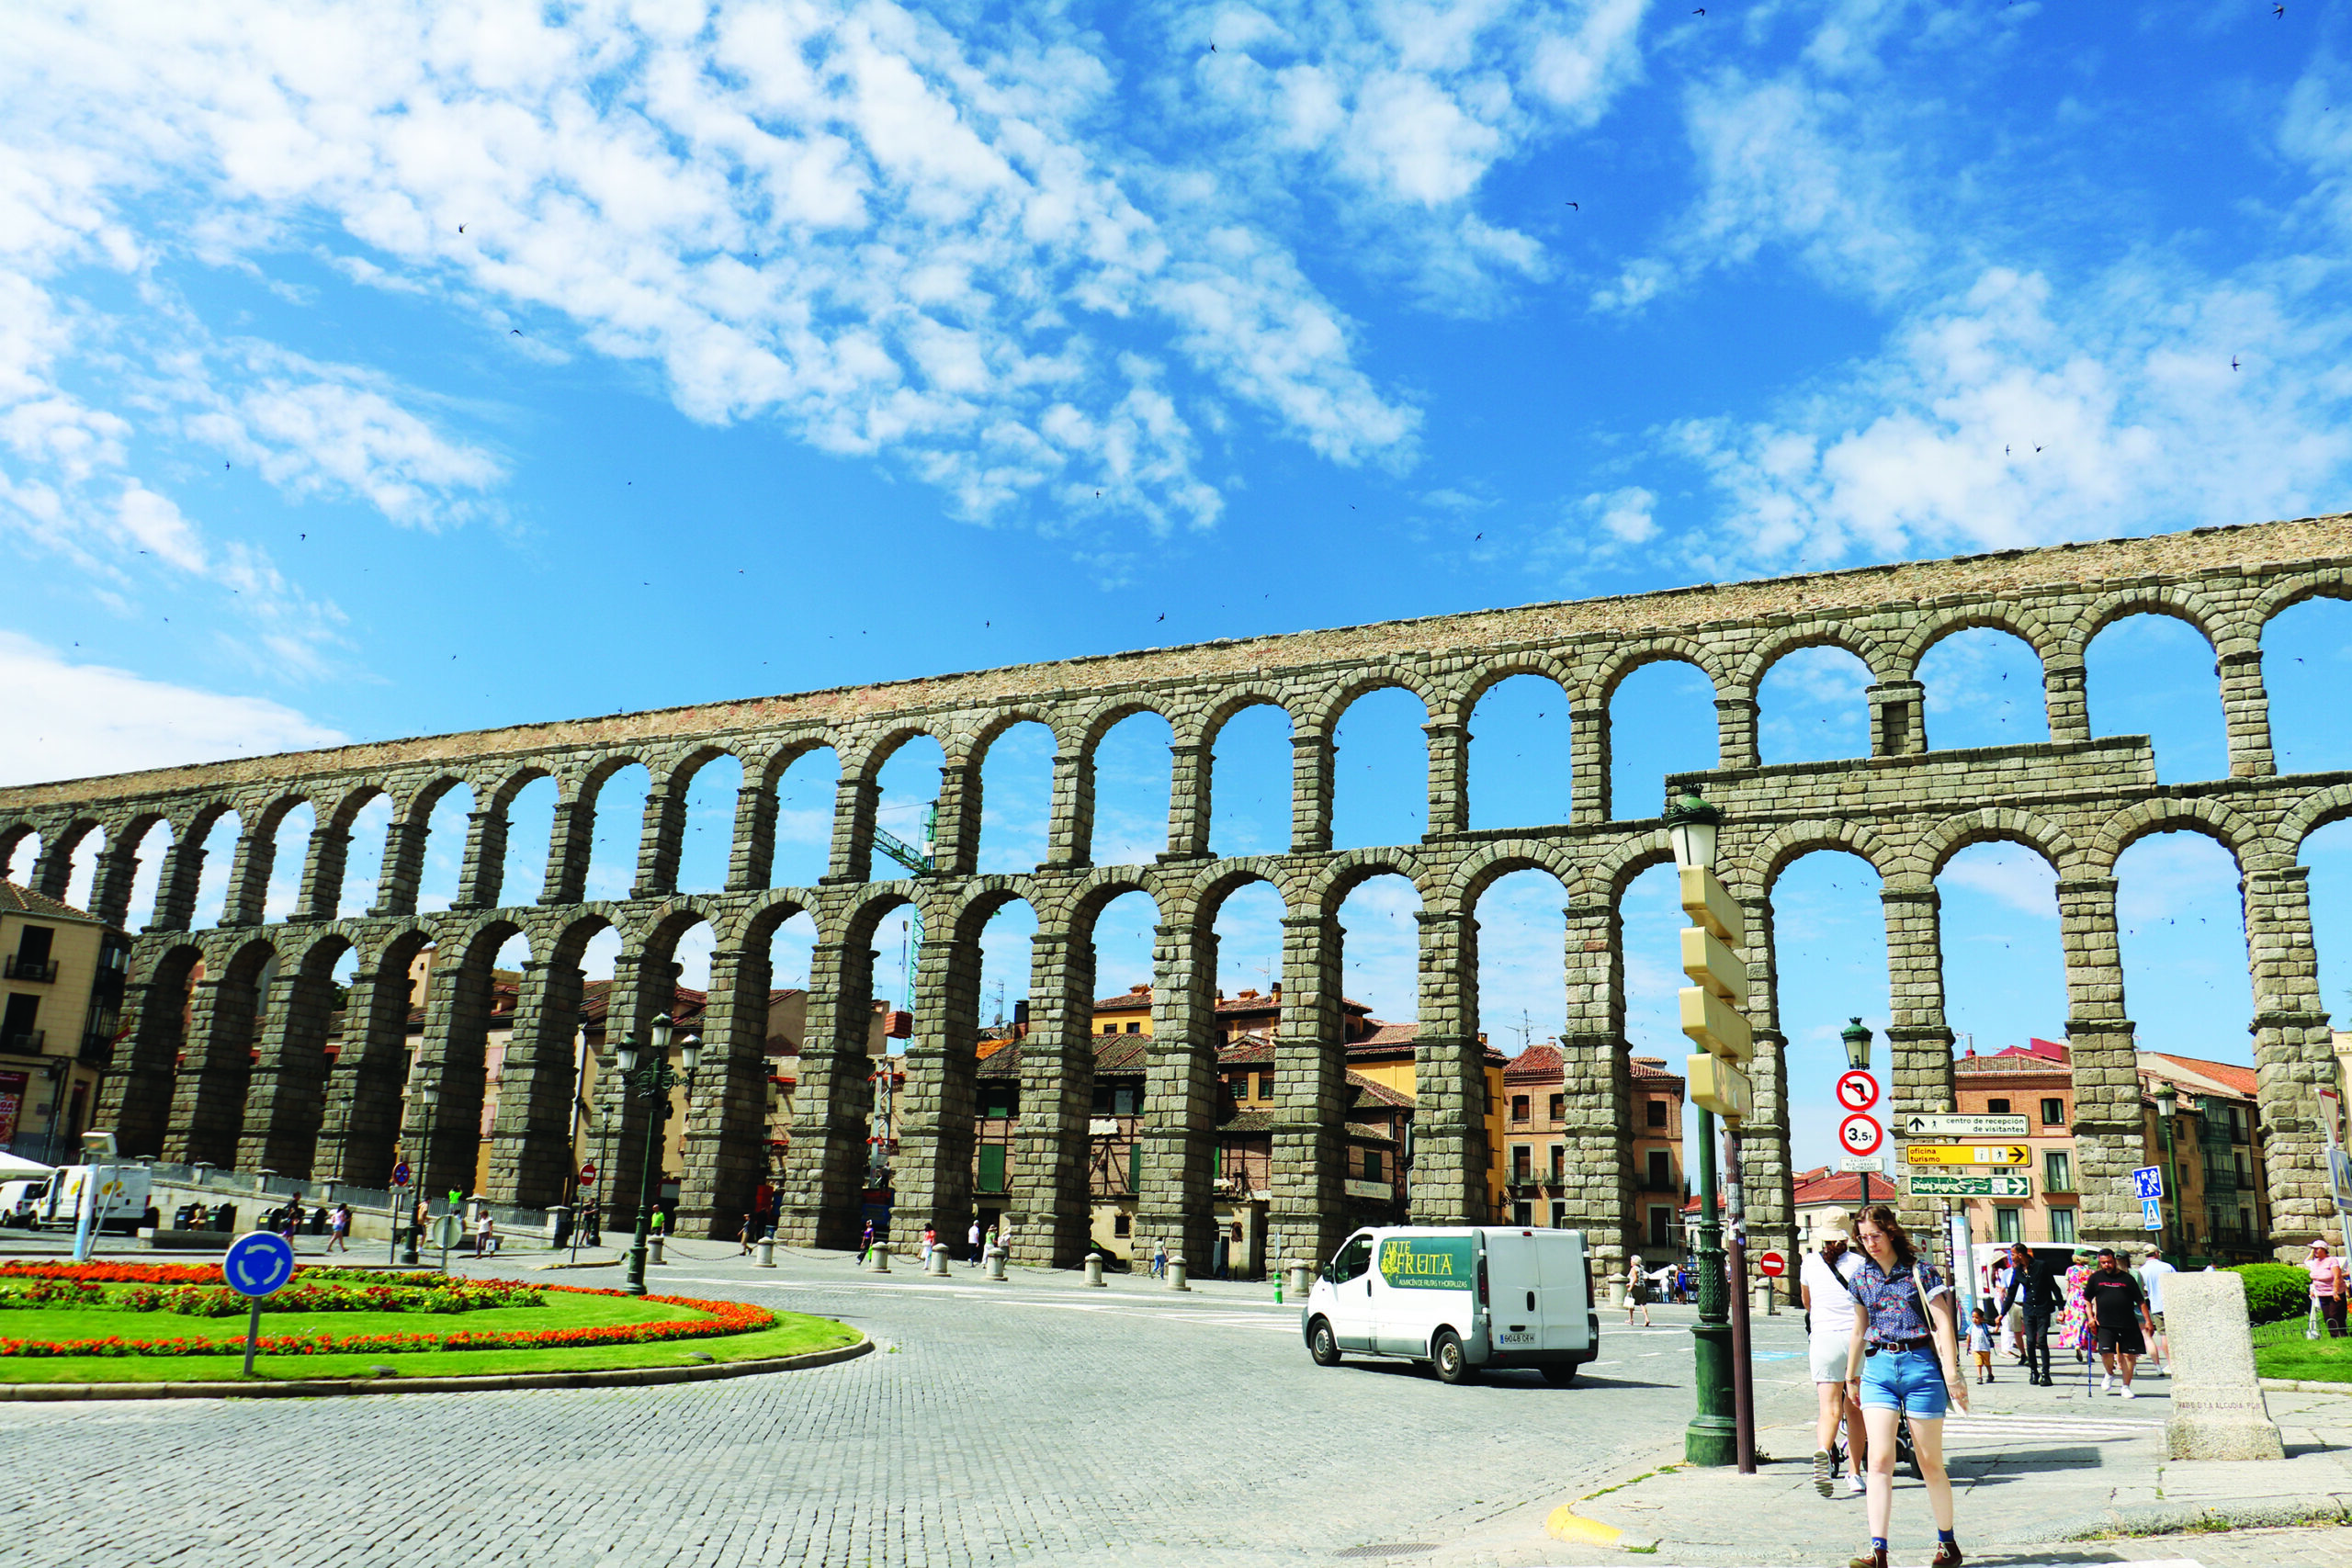 Aqueduct is one of the most remarkable structures in Segovia